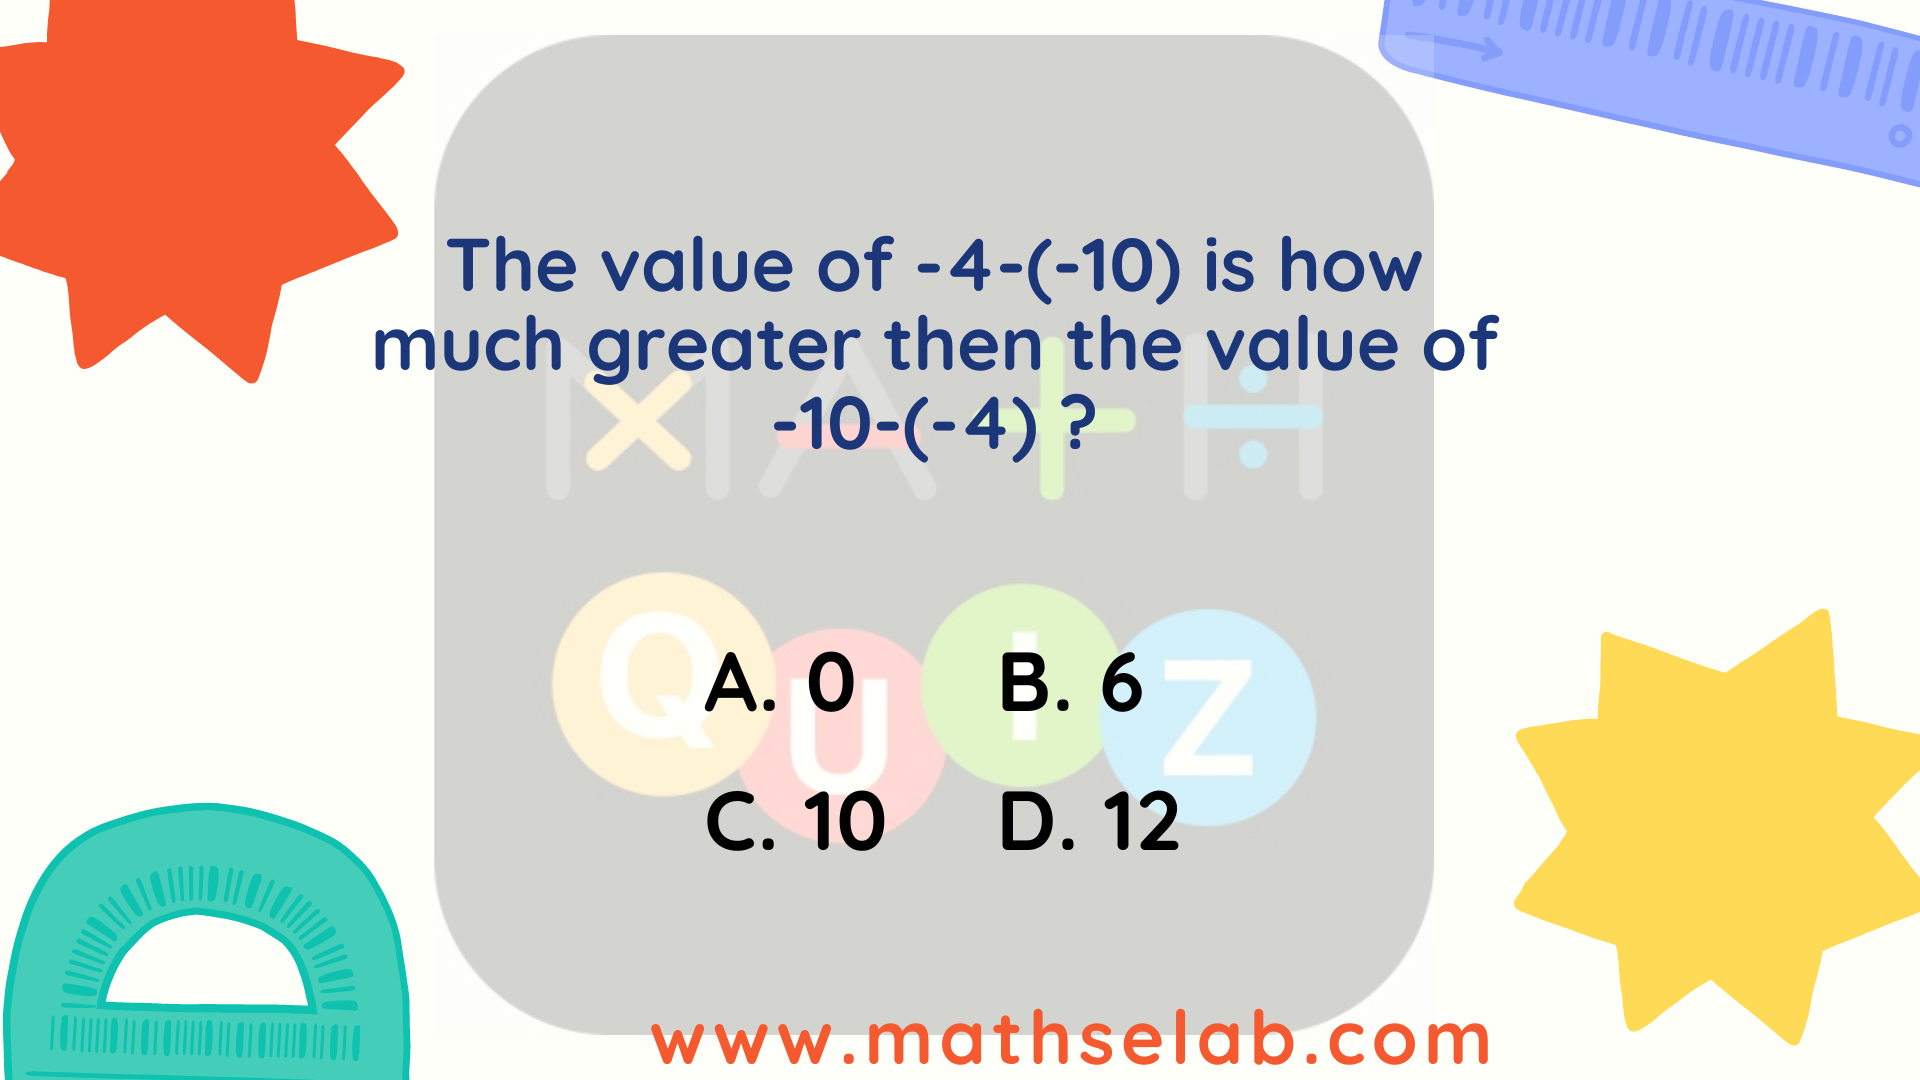 The value of -4-(-10) is how much greater then the value of -10-(-4) www.mathselab.com